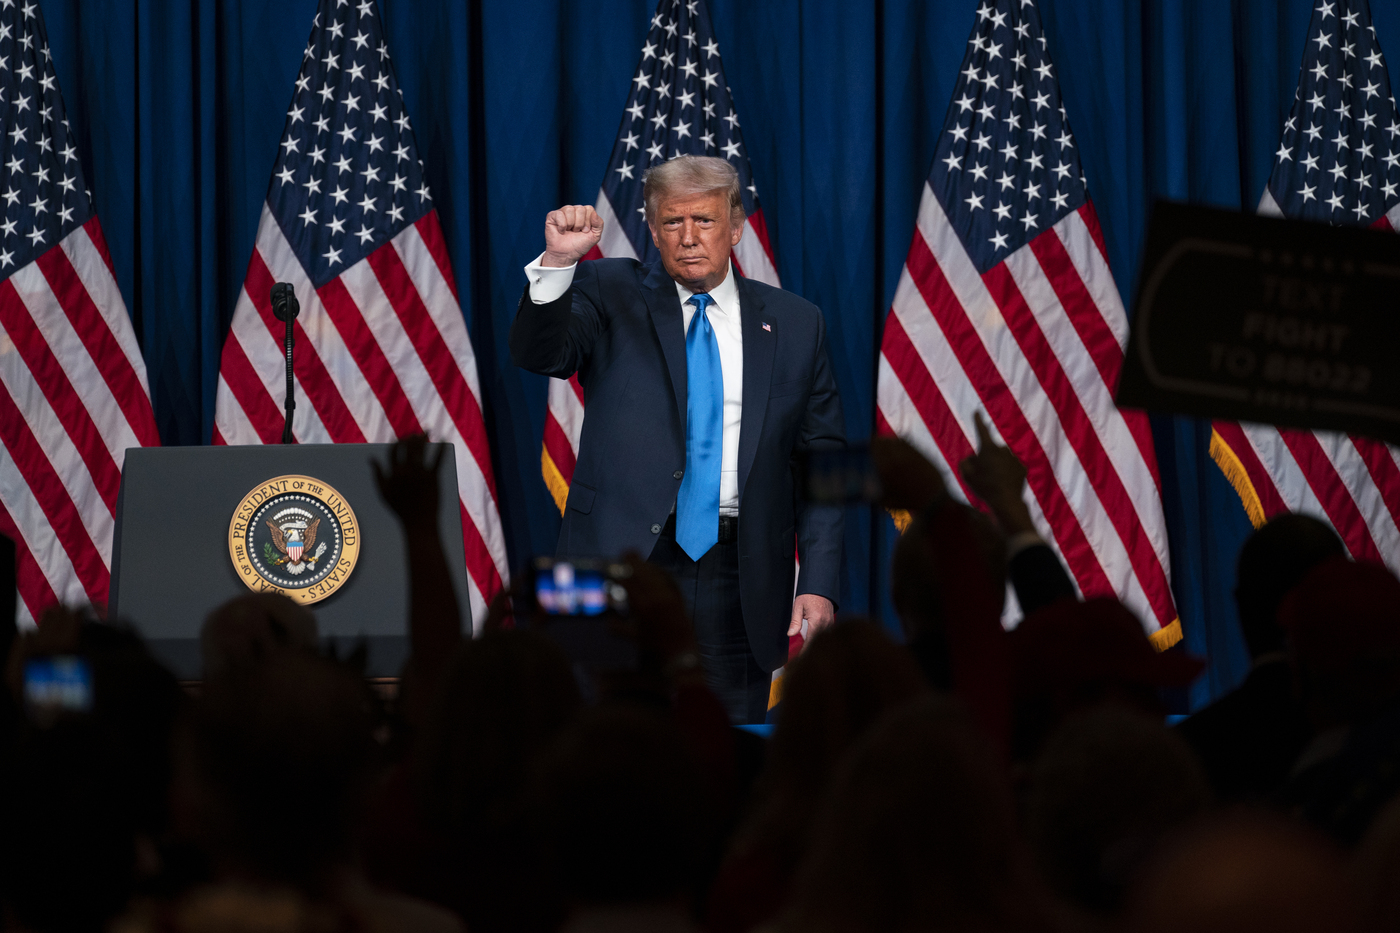 President Donald Trump gestures to the crowd after speaking at Republican National Committee convention, Monday, Aug. 24, 2020, in Charlotte. (AP Photo/Evan Vucci)